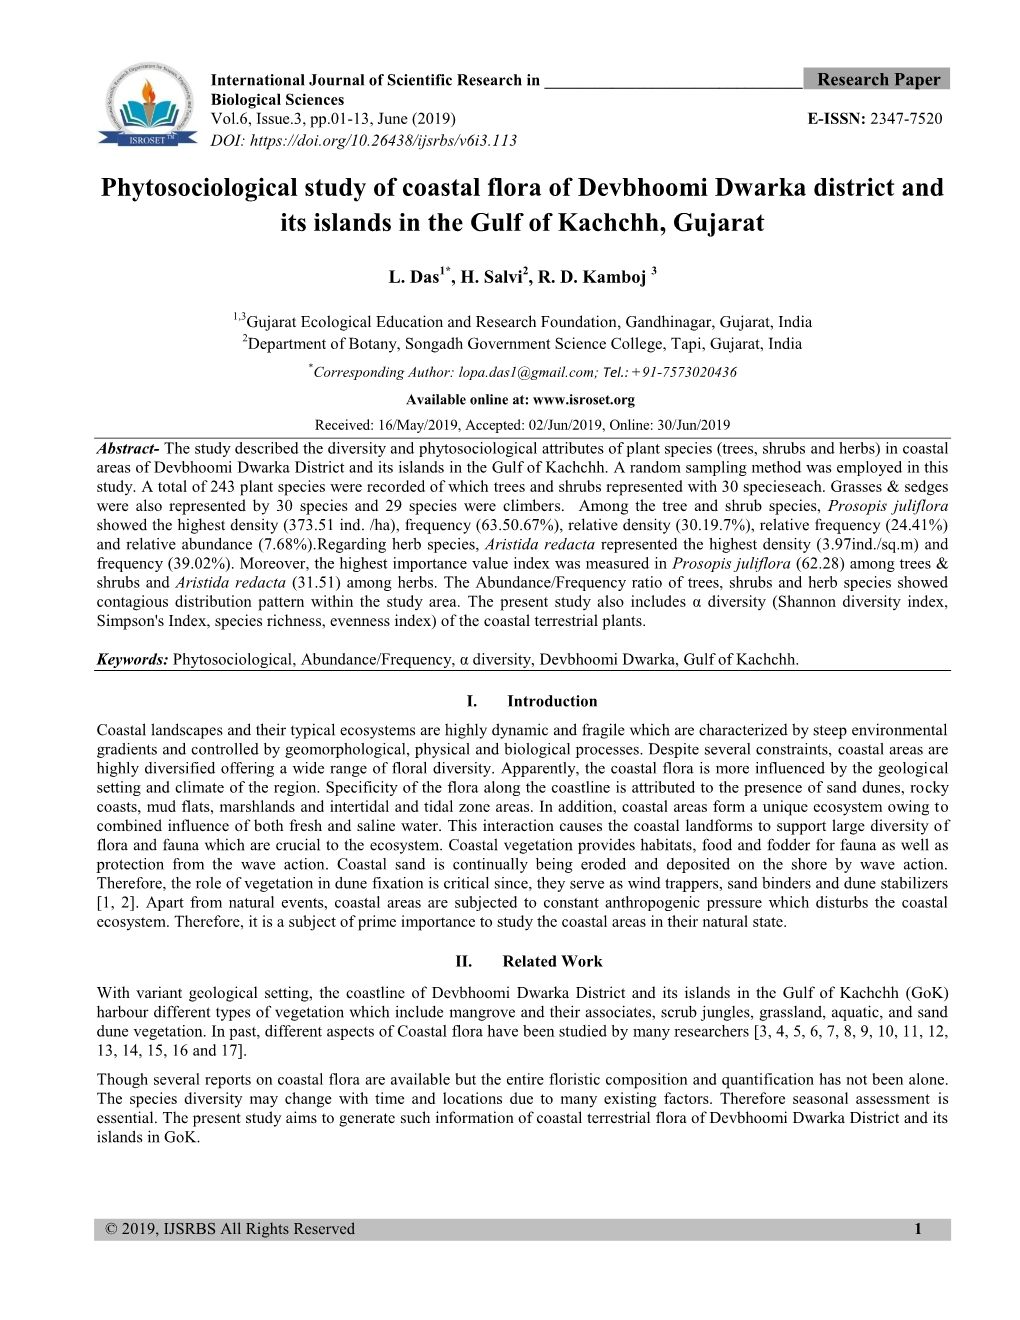 Phytosociological Study of Coastal Flora of Devbhoomi Dwarka District and Its Islands in the Gulf of Kachchh, Gujarat